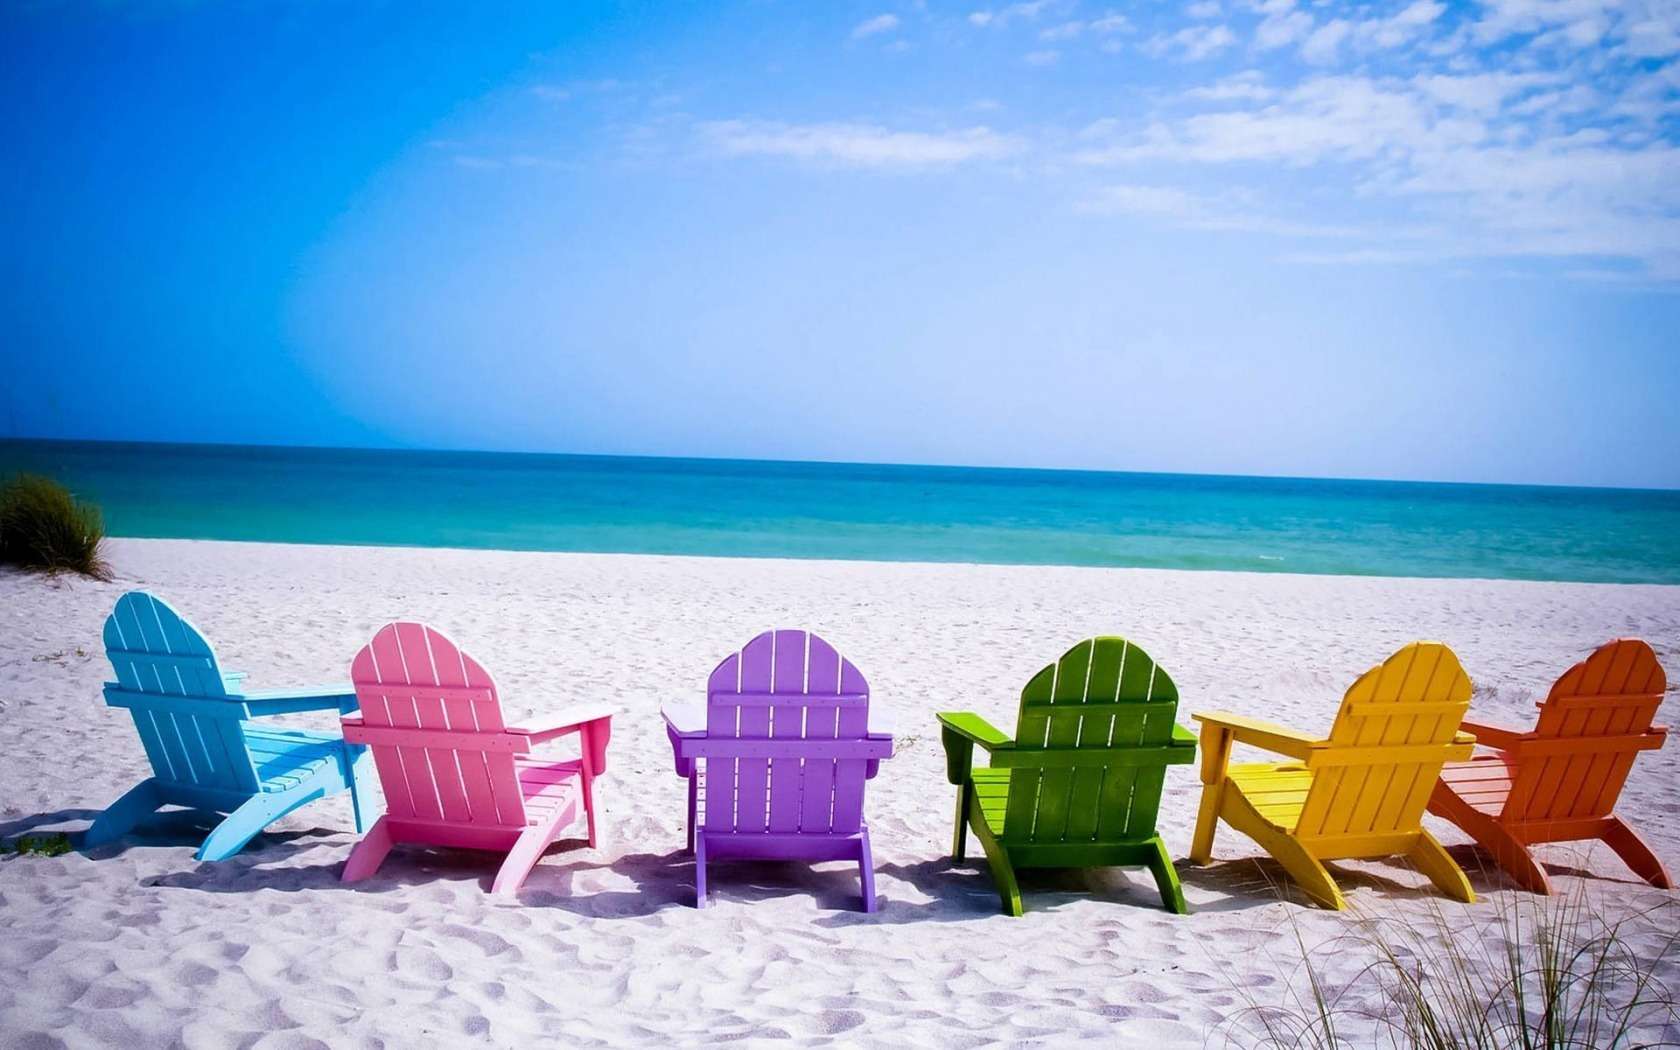 colorful-chairs-free-beach-wallpapers-beach-backgrounds-587fb9eb5f9b584db31f75d4.jpg